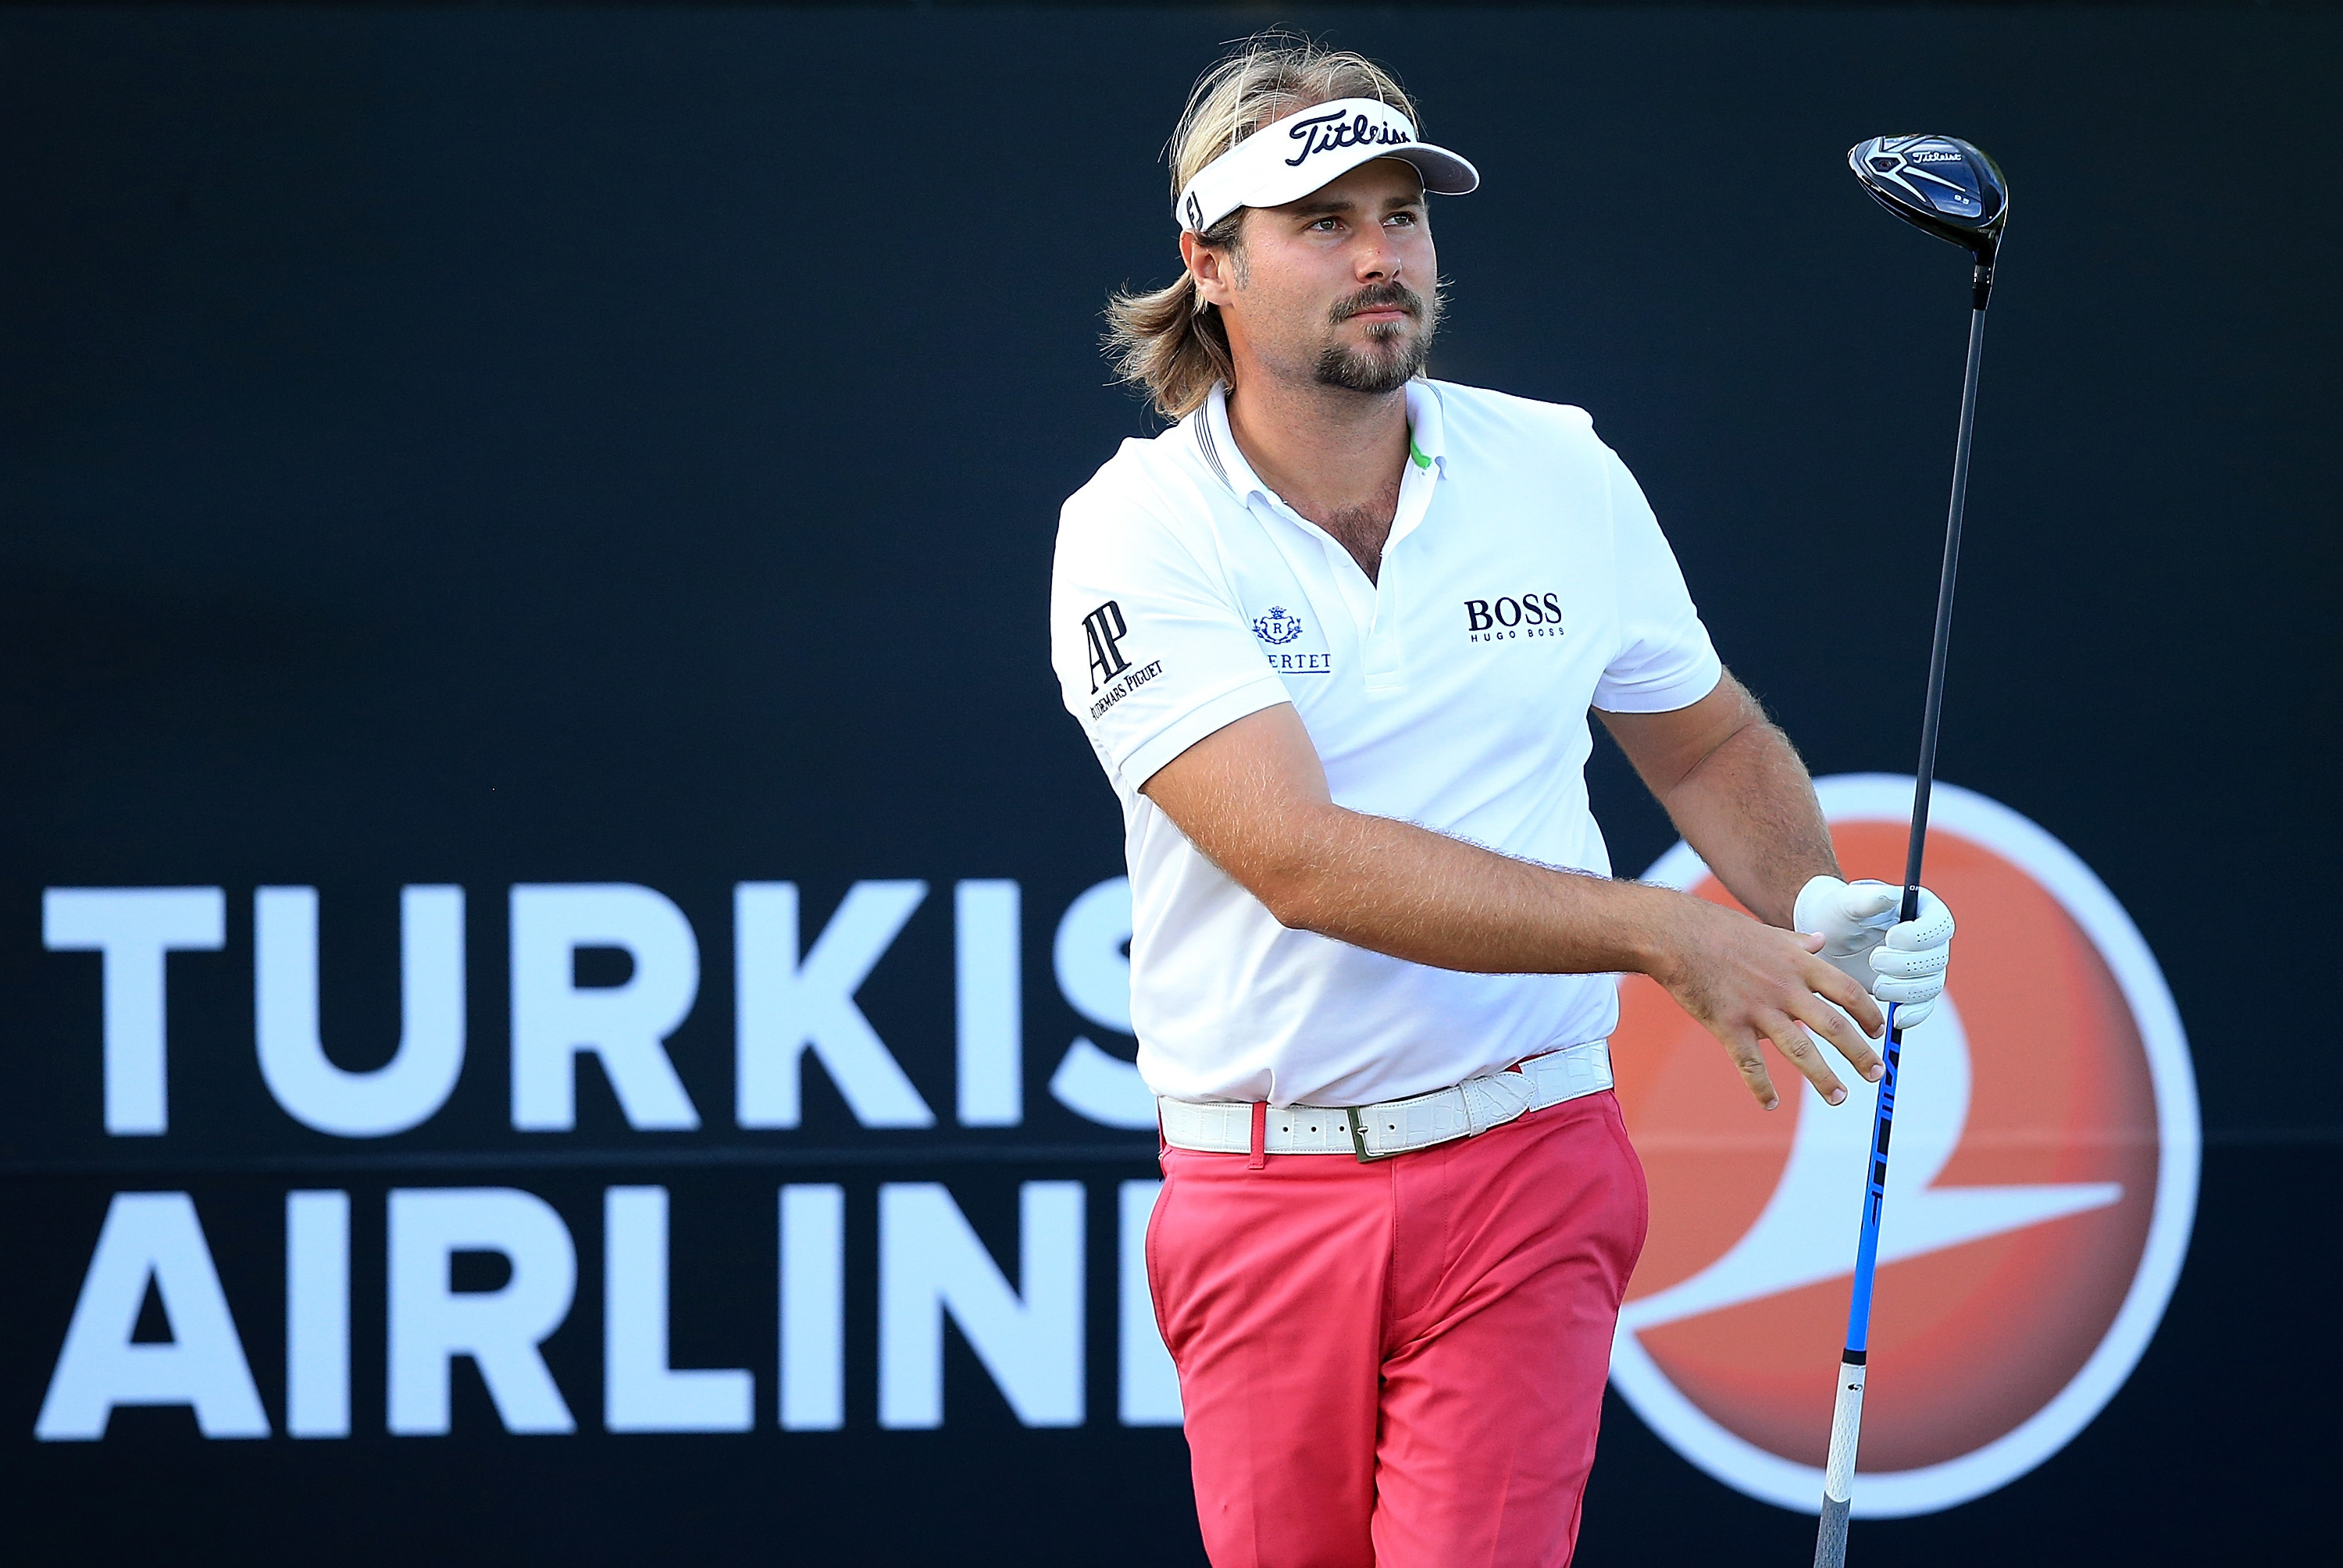 Victor Dubuisson admires the flight of his Pro V1x using his Titleist 915 D2 driver (Photo: Getty Images)